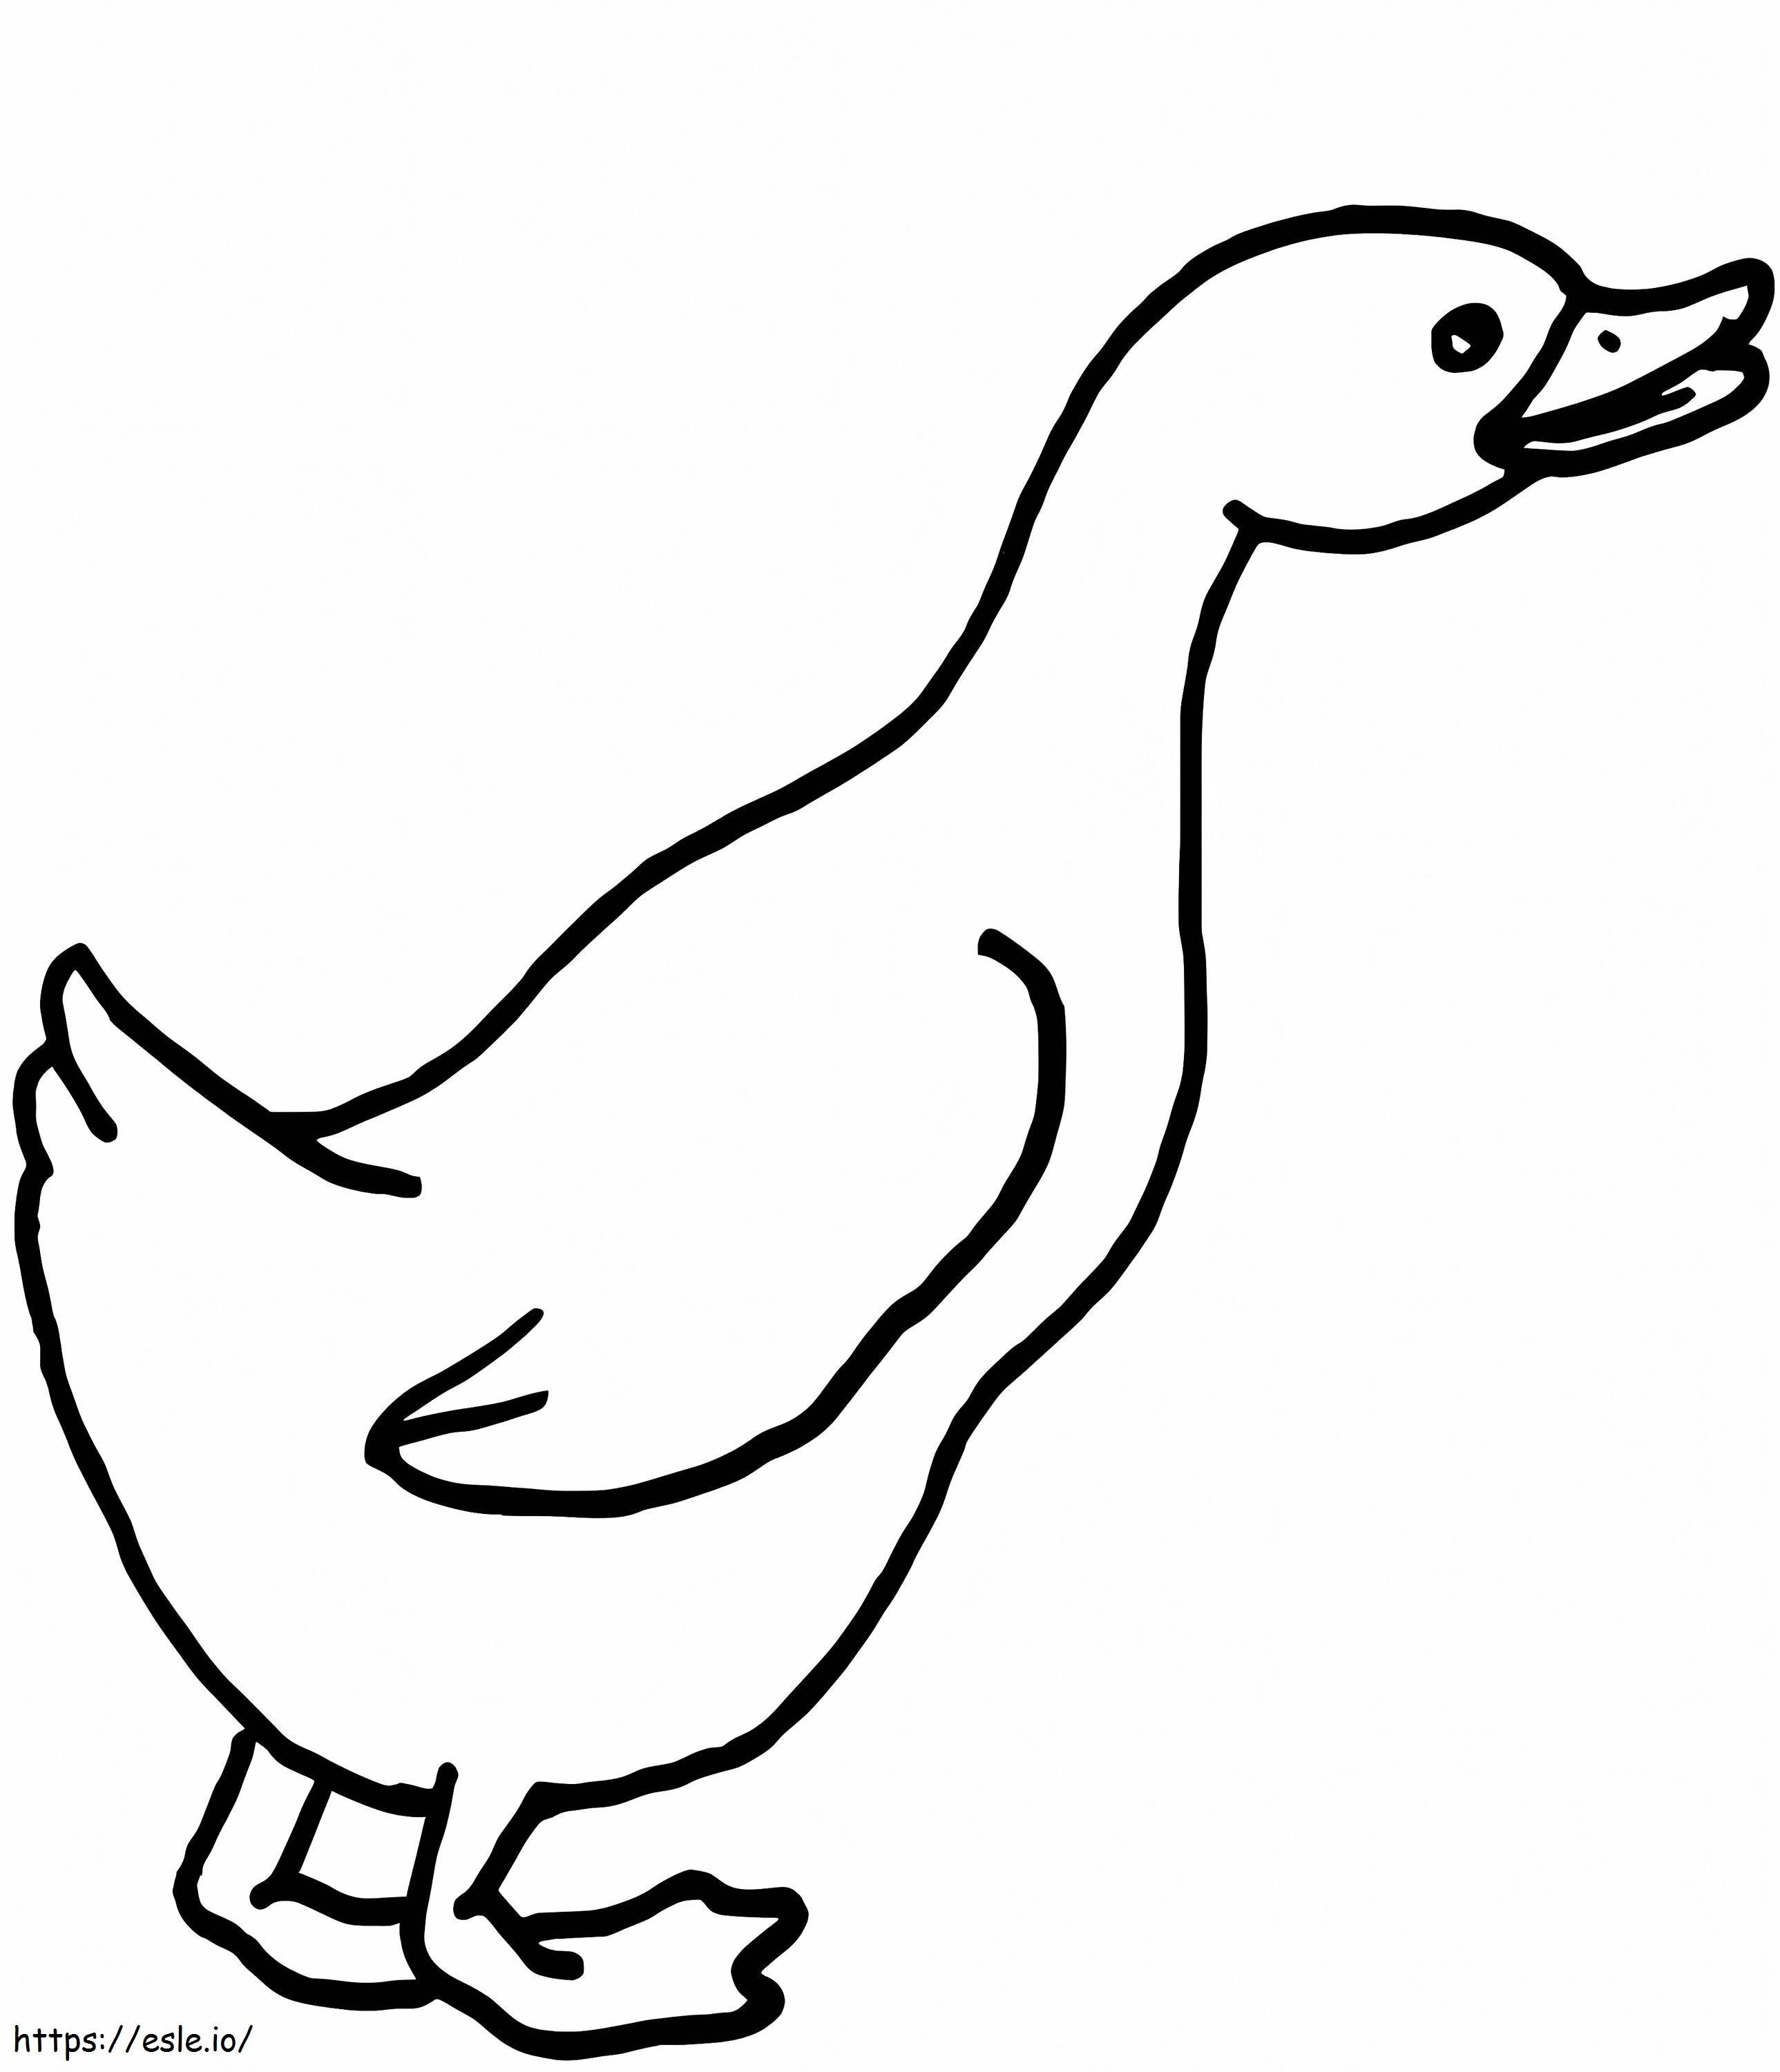 Curious Goose coloring page